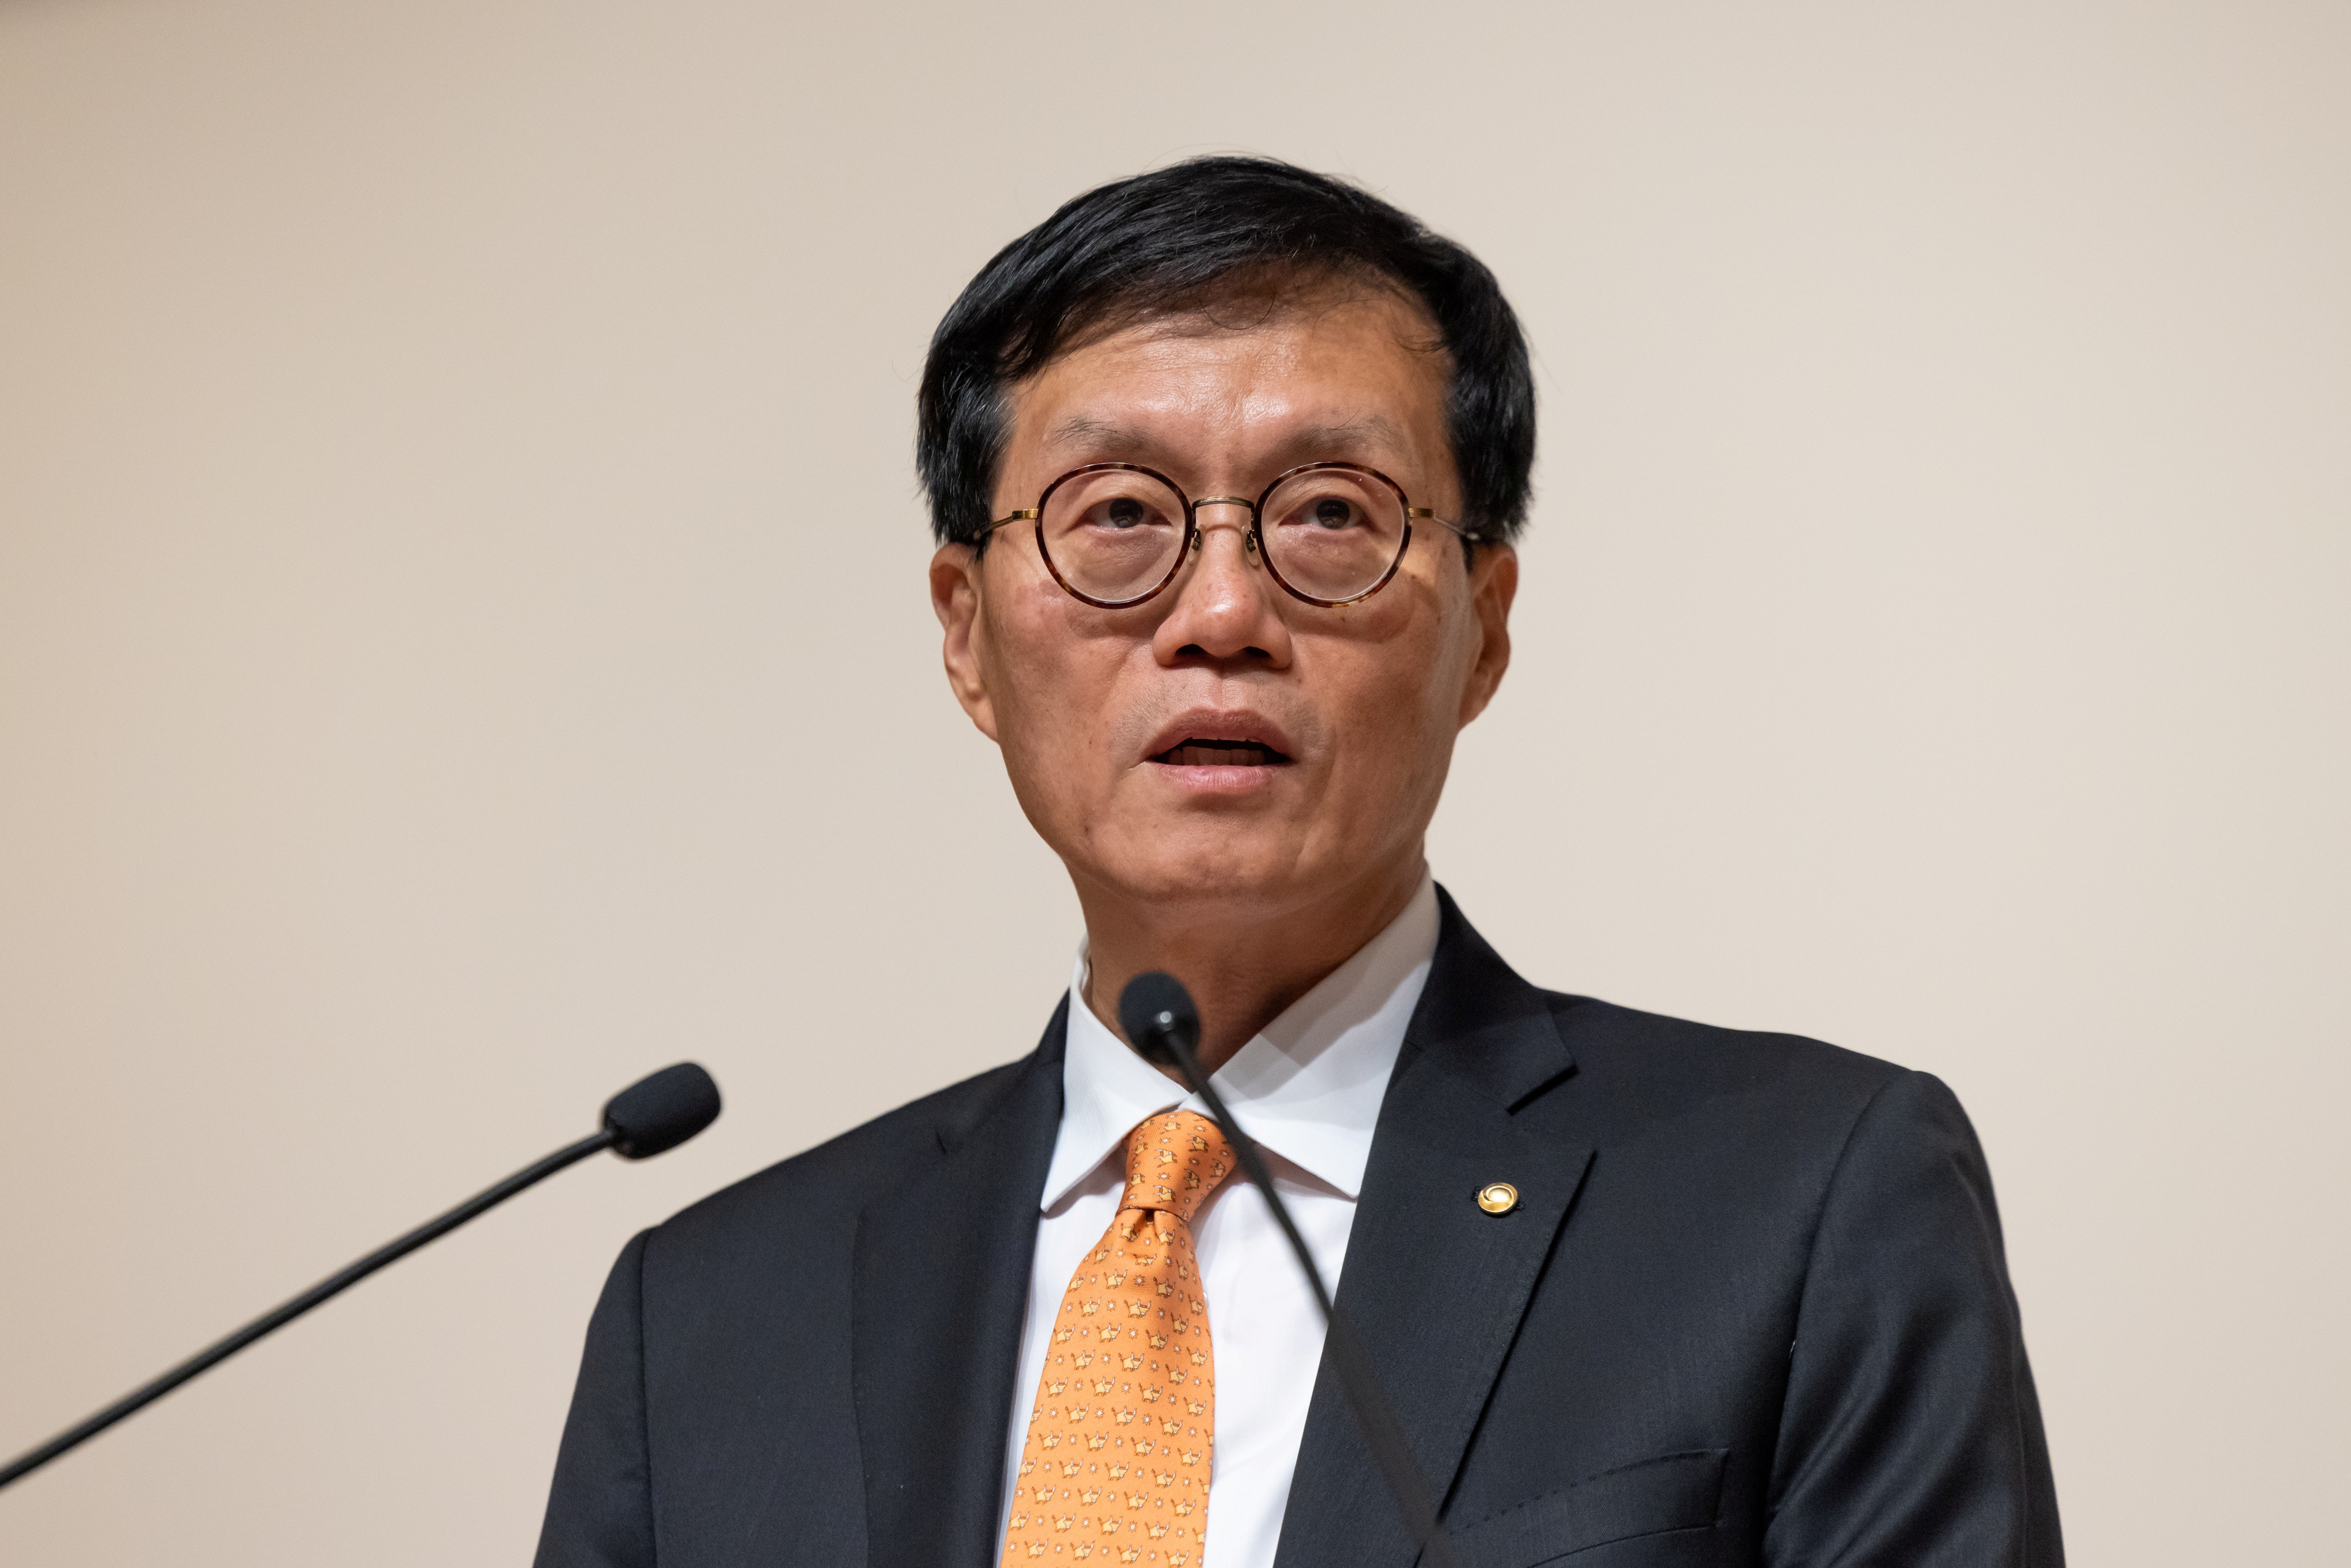 South Korea's new central bank governor Rhee Chang-yong inauguration ceremony in Seoul